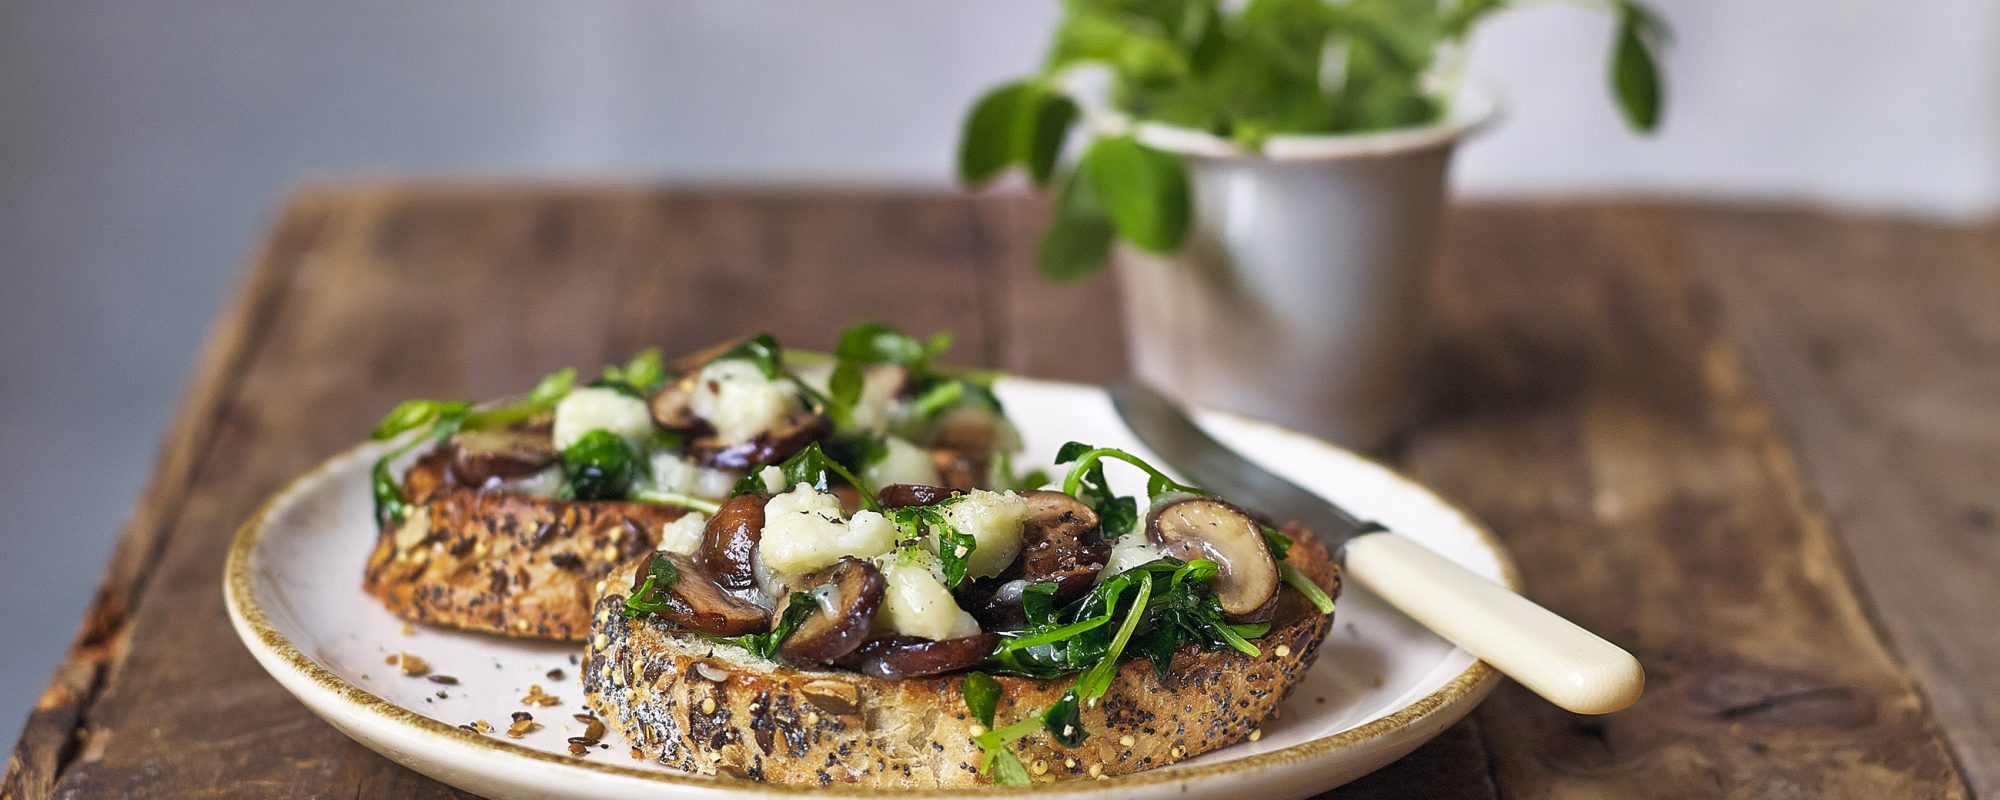 Sautéed Mushrooms & Pea Shoots with melted Goat’s Cheese on Sourdough